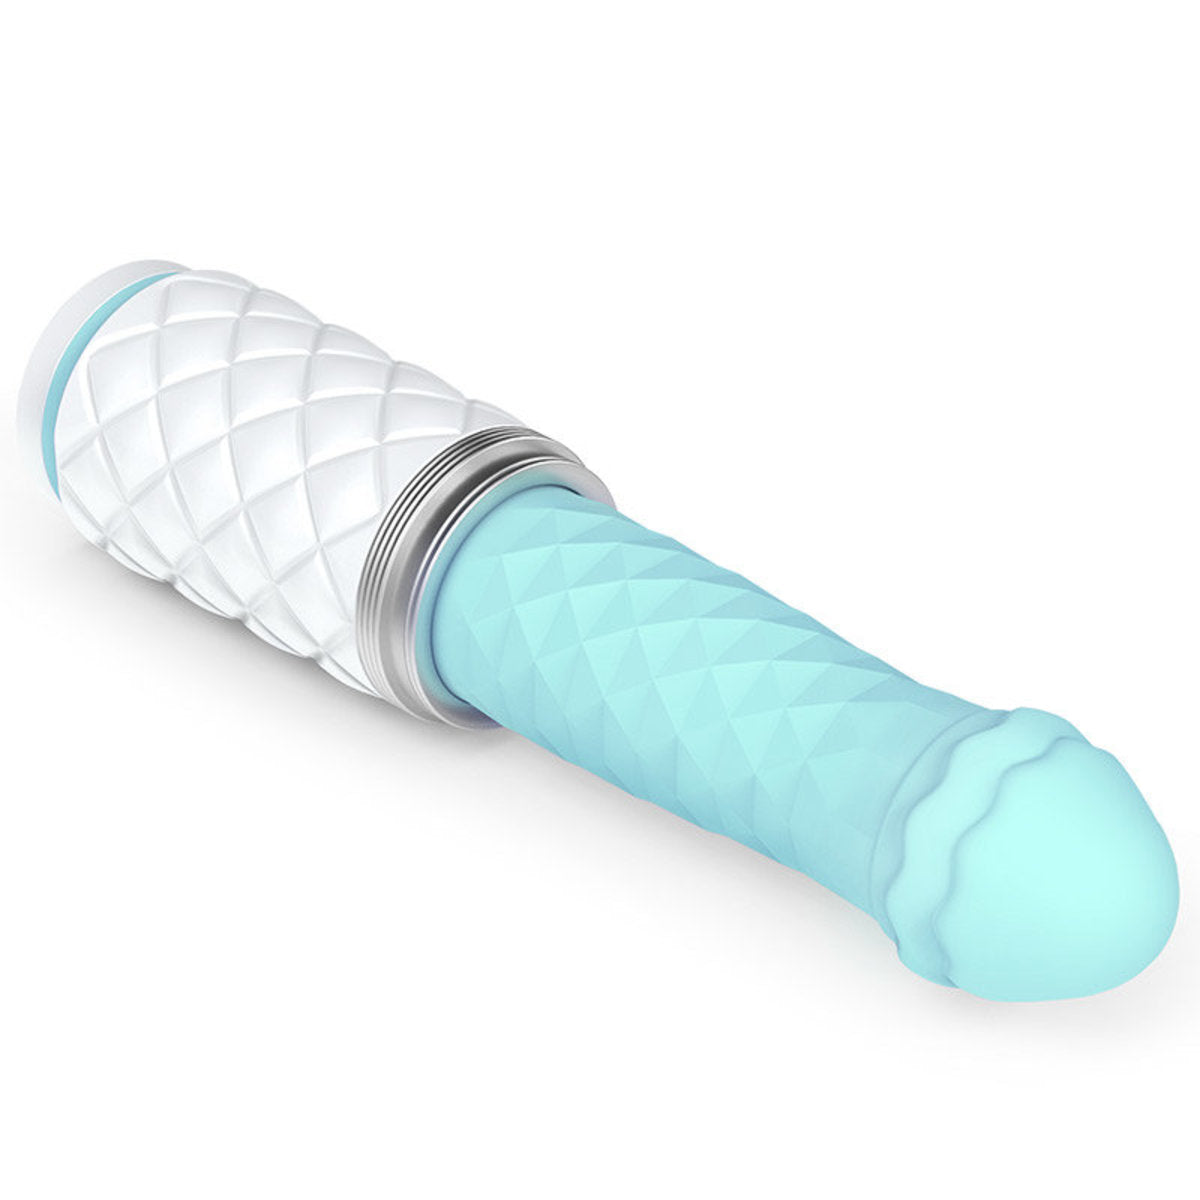 Pillow Talk Fiesty | Thrusting Massager - Teal Introducing Feisty – Pillow Talk’s thrusting vibrator that knows no limits! Feisty is the perfect vibrator for those looking for a unique experience. The incredible insertable thrusting shaft has 2 speeds and 3 dynamic functions of vibrations and thrusts for nonstop pleasure. Enjoy the soft silicone material that is body-safe to use on all your delicate areas. 